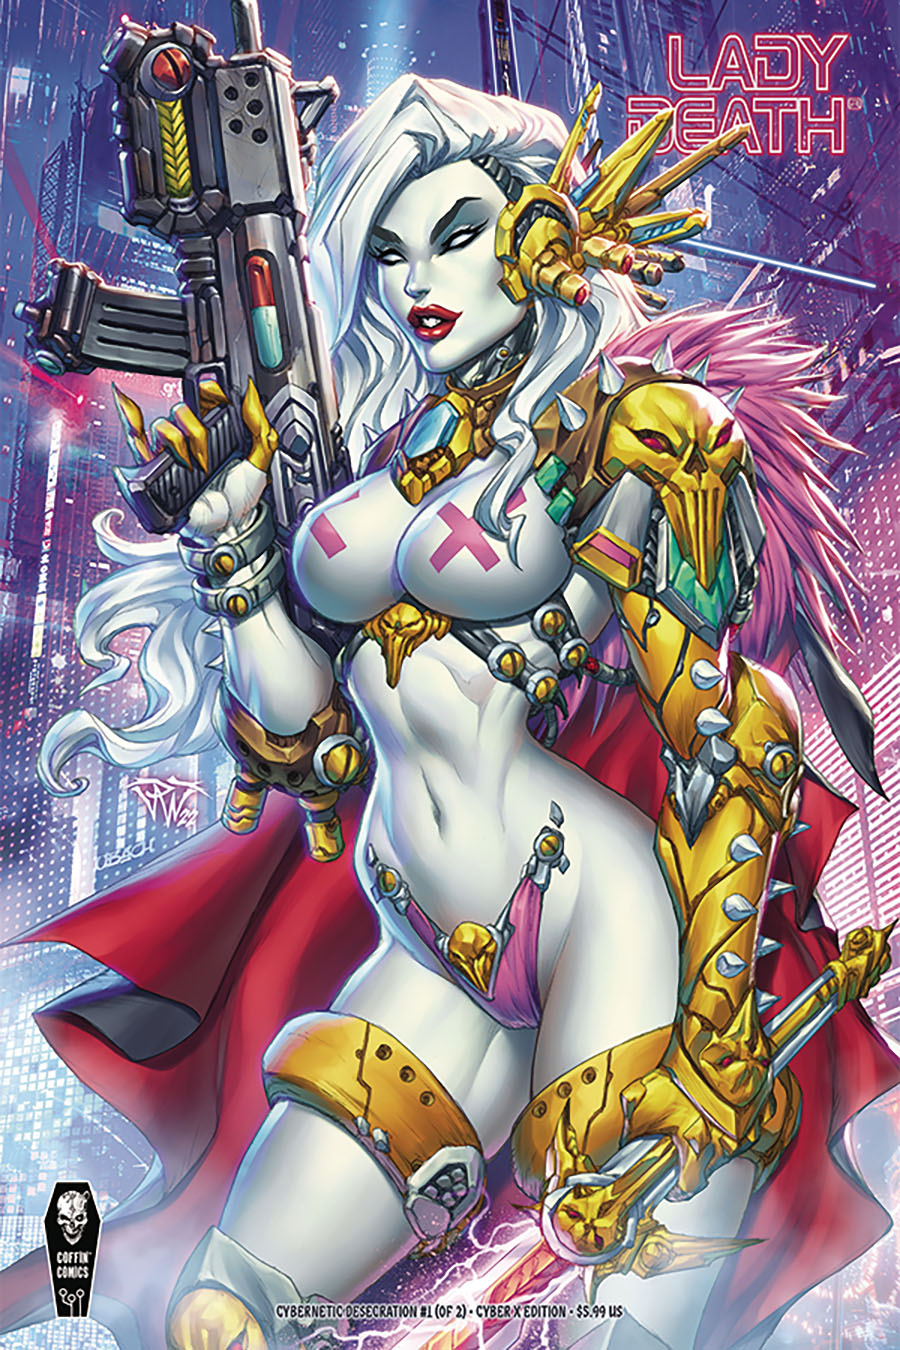 Lady Death Cybernetic Desecration #1 Cover B Variant Paolo Pantalena Cyber X Cover